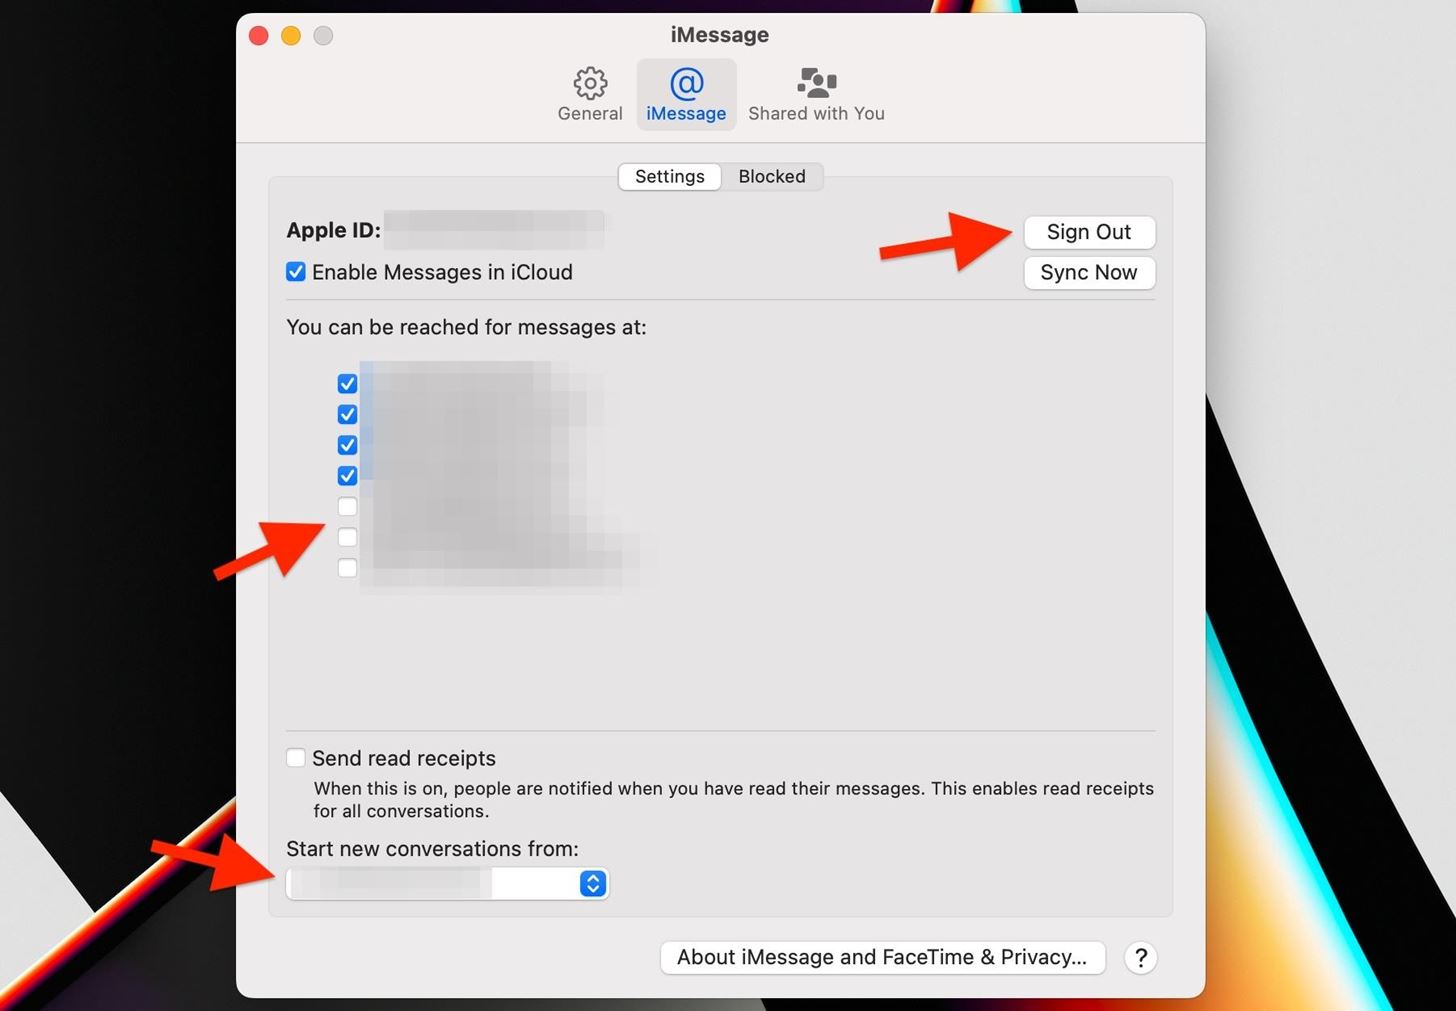 How to Keep Other iMessage Users from Editing or Taking Back the Messages They Send to You